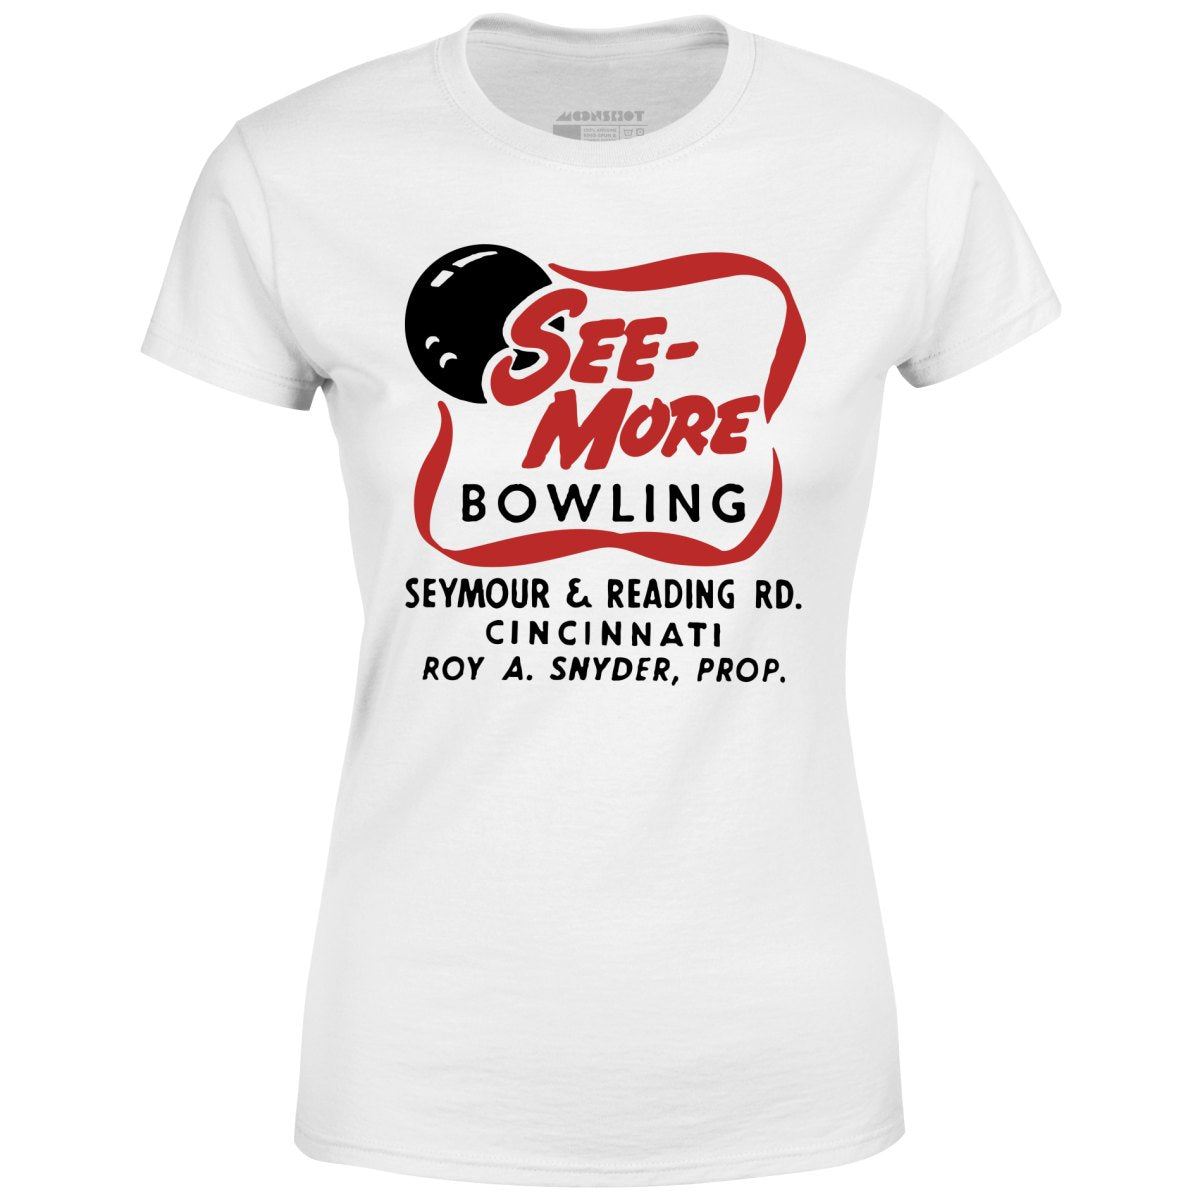 See-More Bowling - Cincinnati, OH - Vintage Bowling Alley - Women's T-Shirt